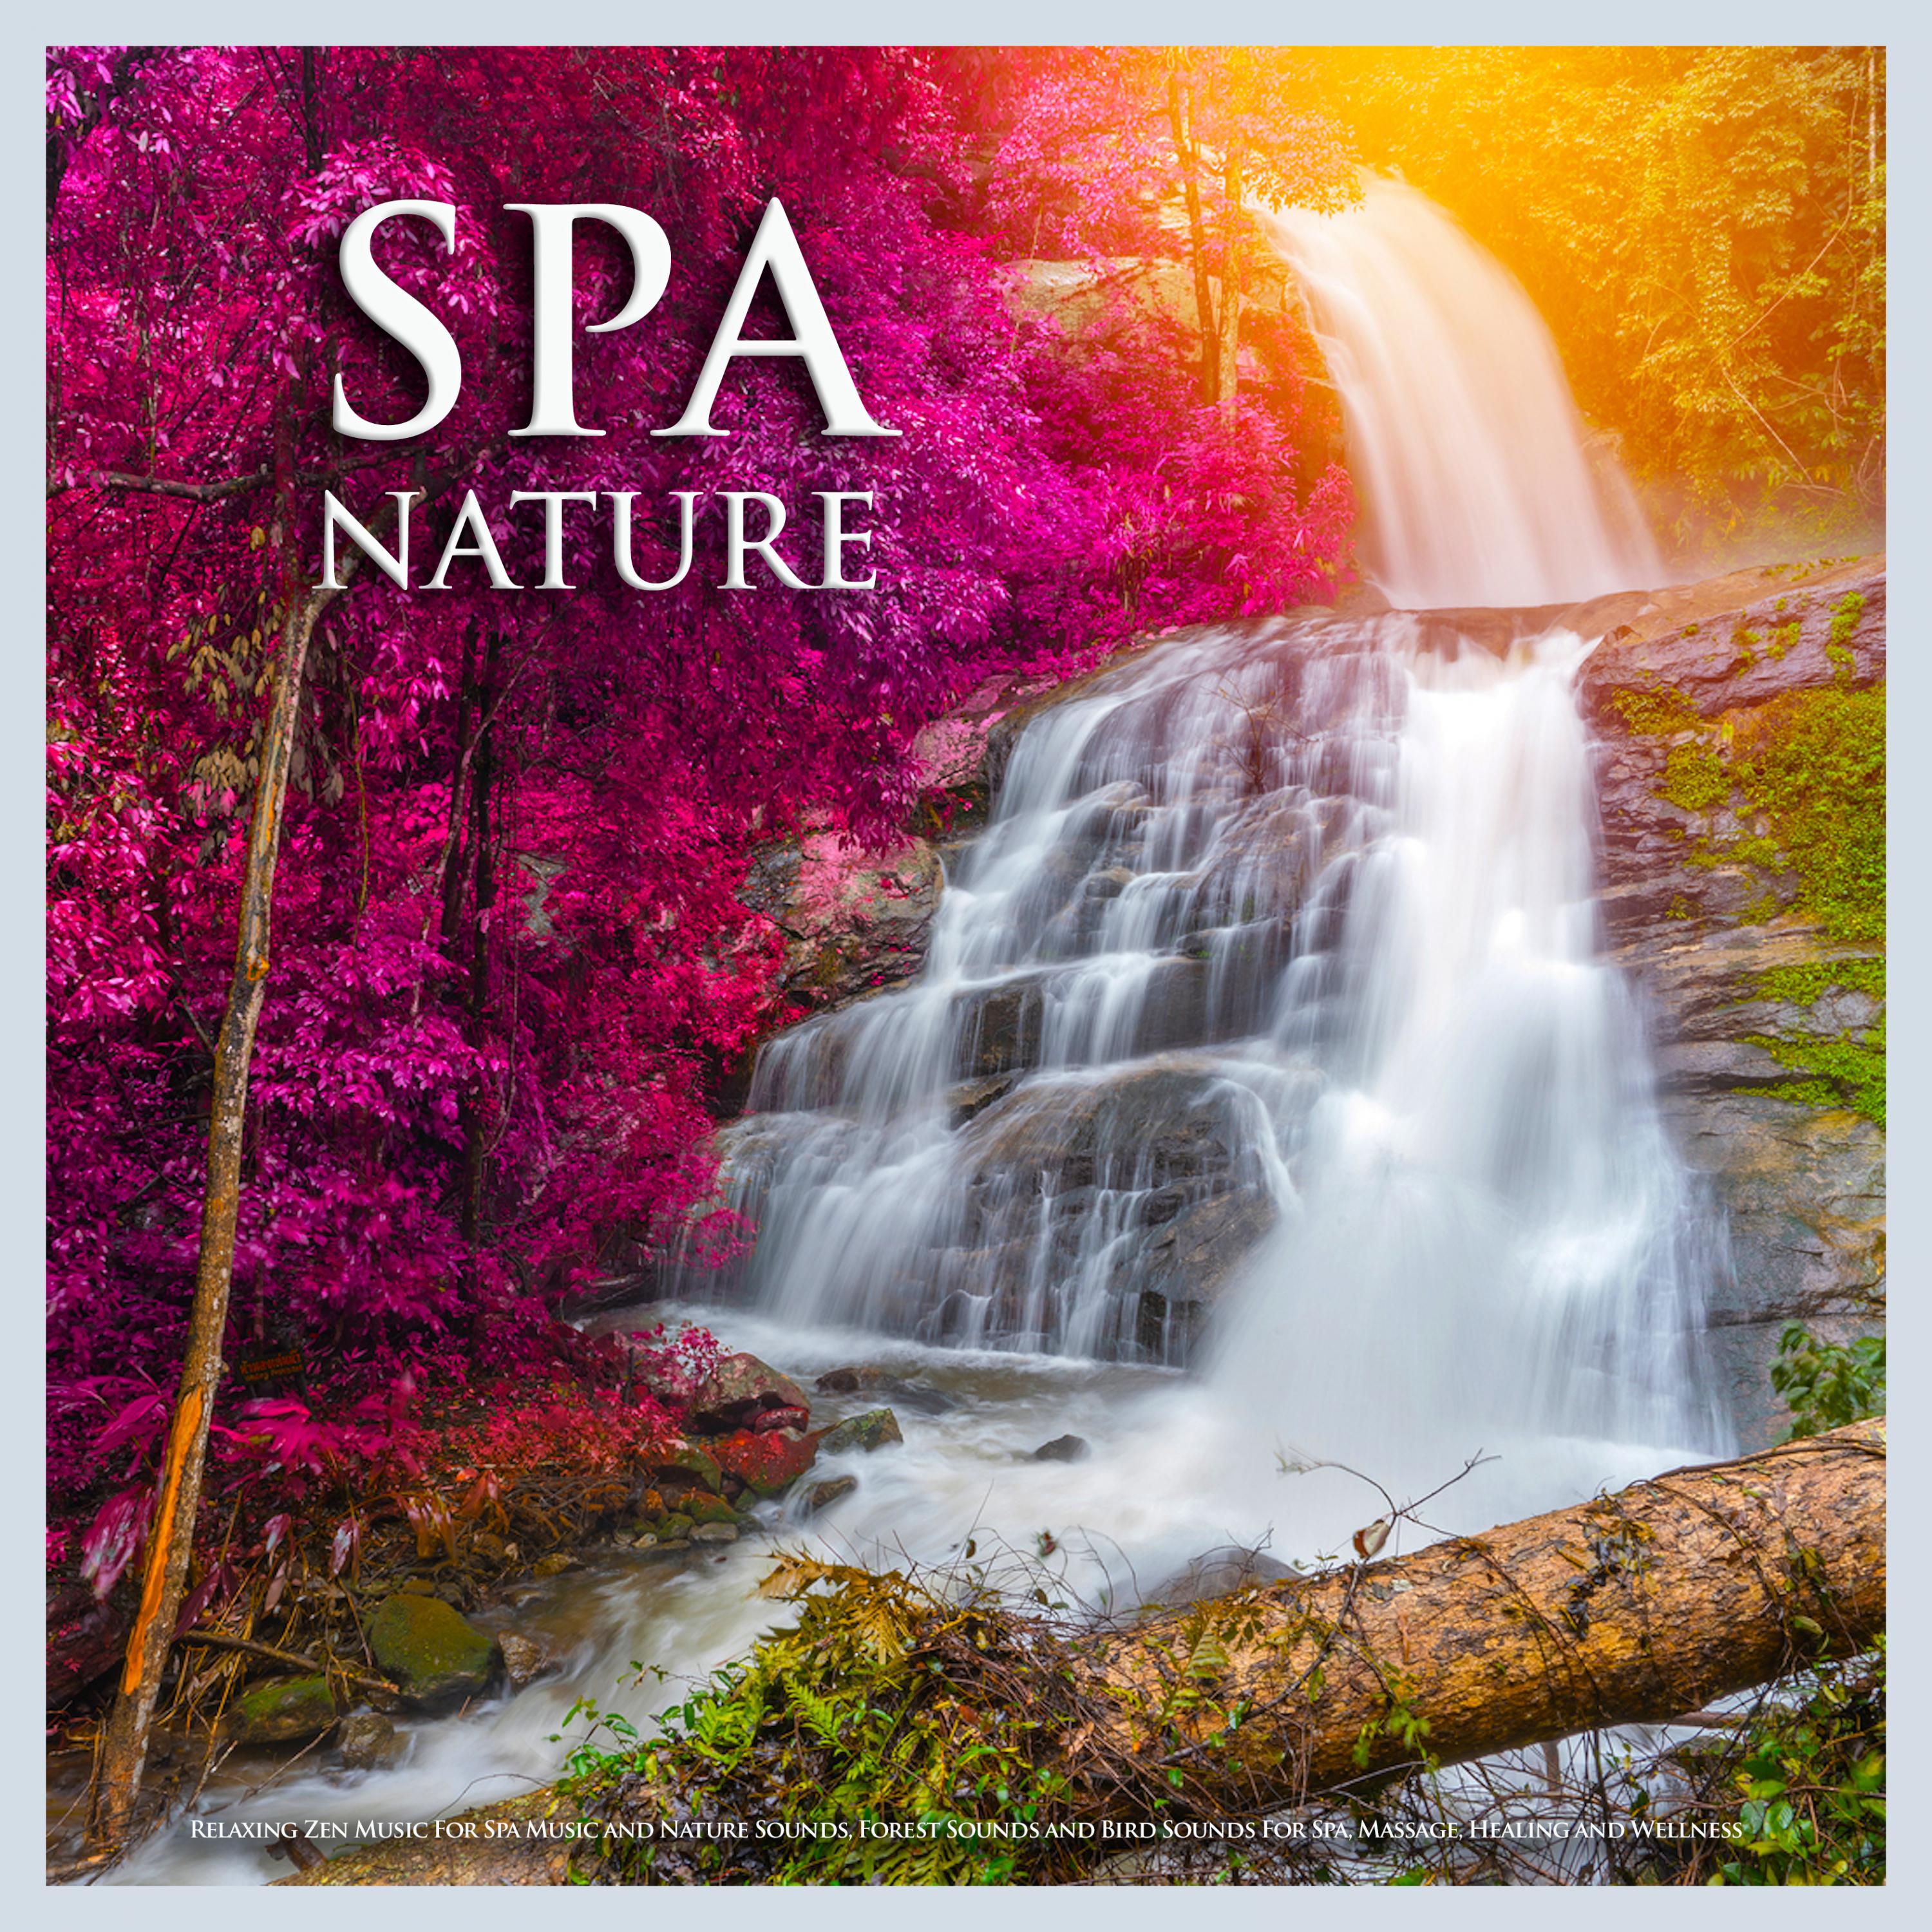 Spa Nature: Relaxing Zen Music For Spa Music and Nature Sounds, Forest Sounds and Bird Sounds For Spa, Massage, Healing and Wellness